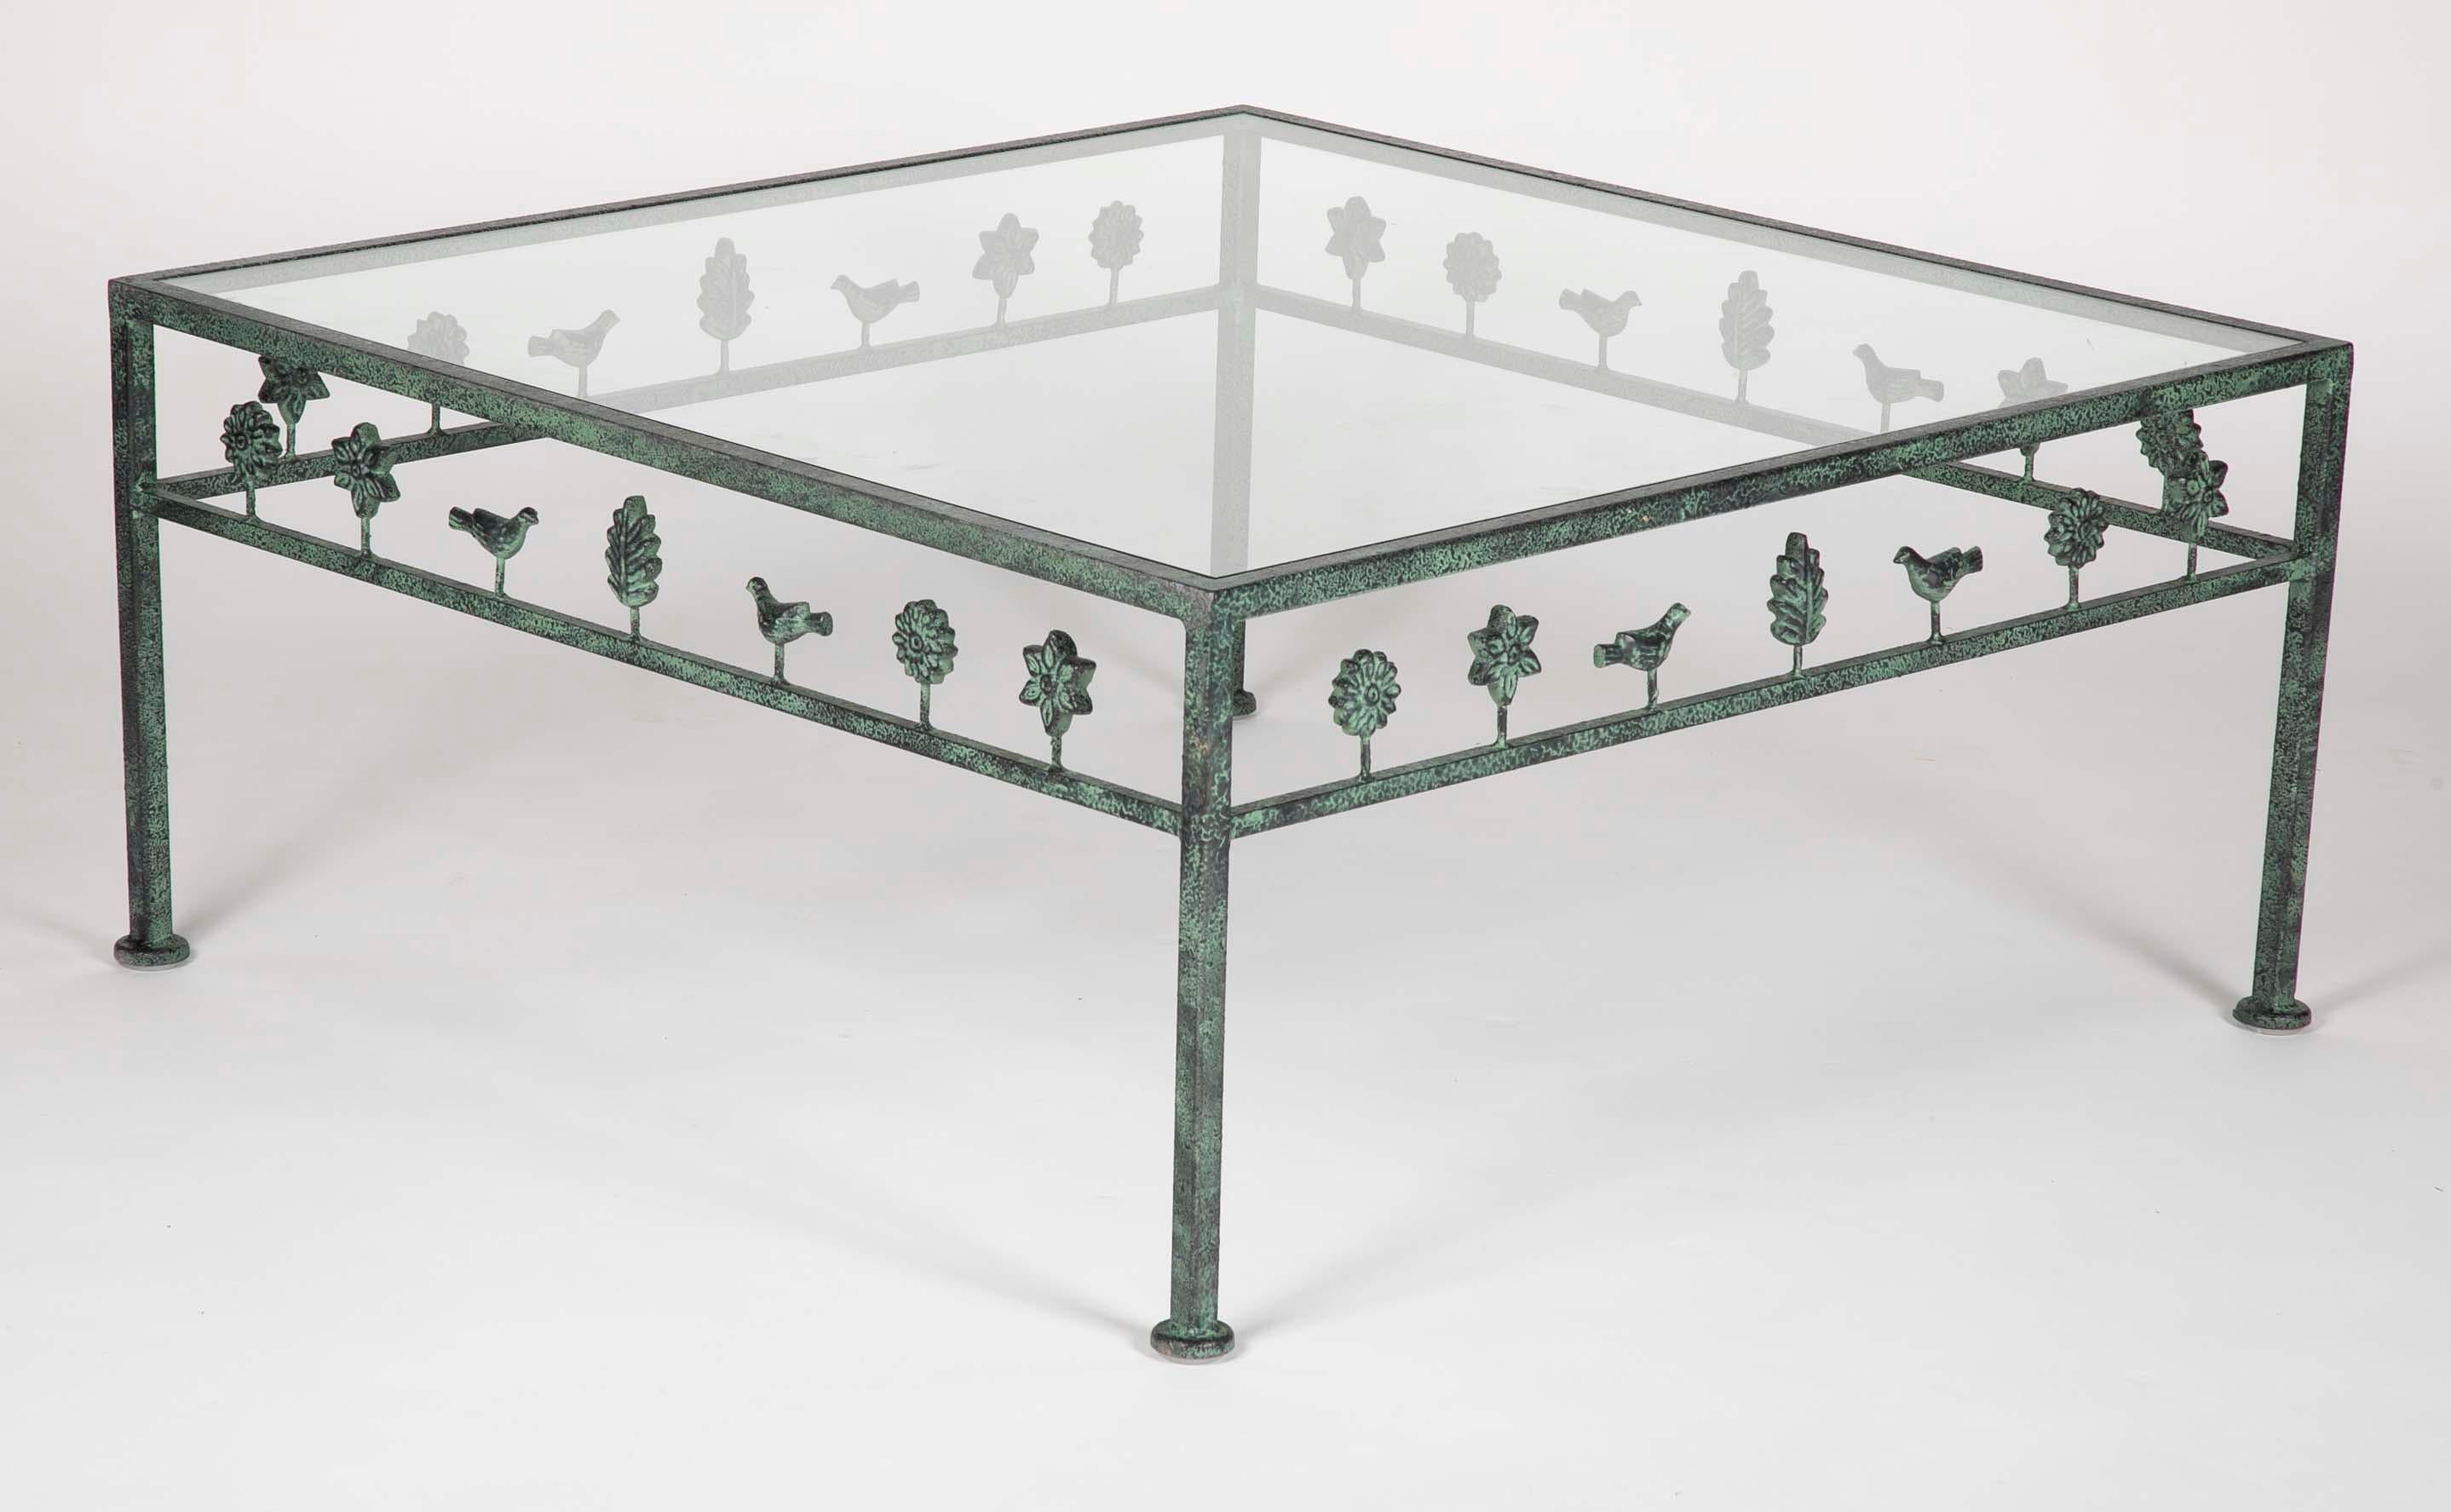 A handsome glass topped coffee or cocktail table in the style of Diego Giacometti. The sides decorated with trees, birds and flowers with an enameled surface in black and verdigris green.